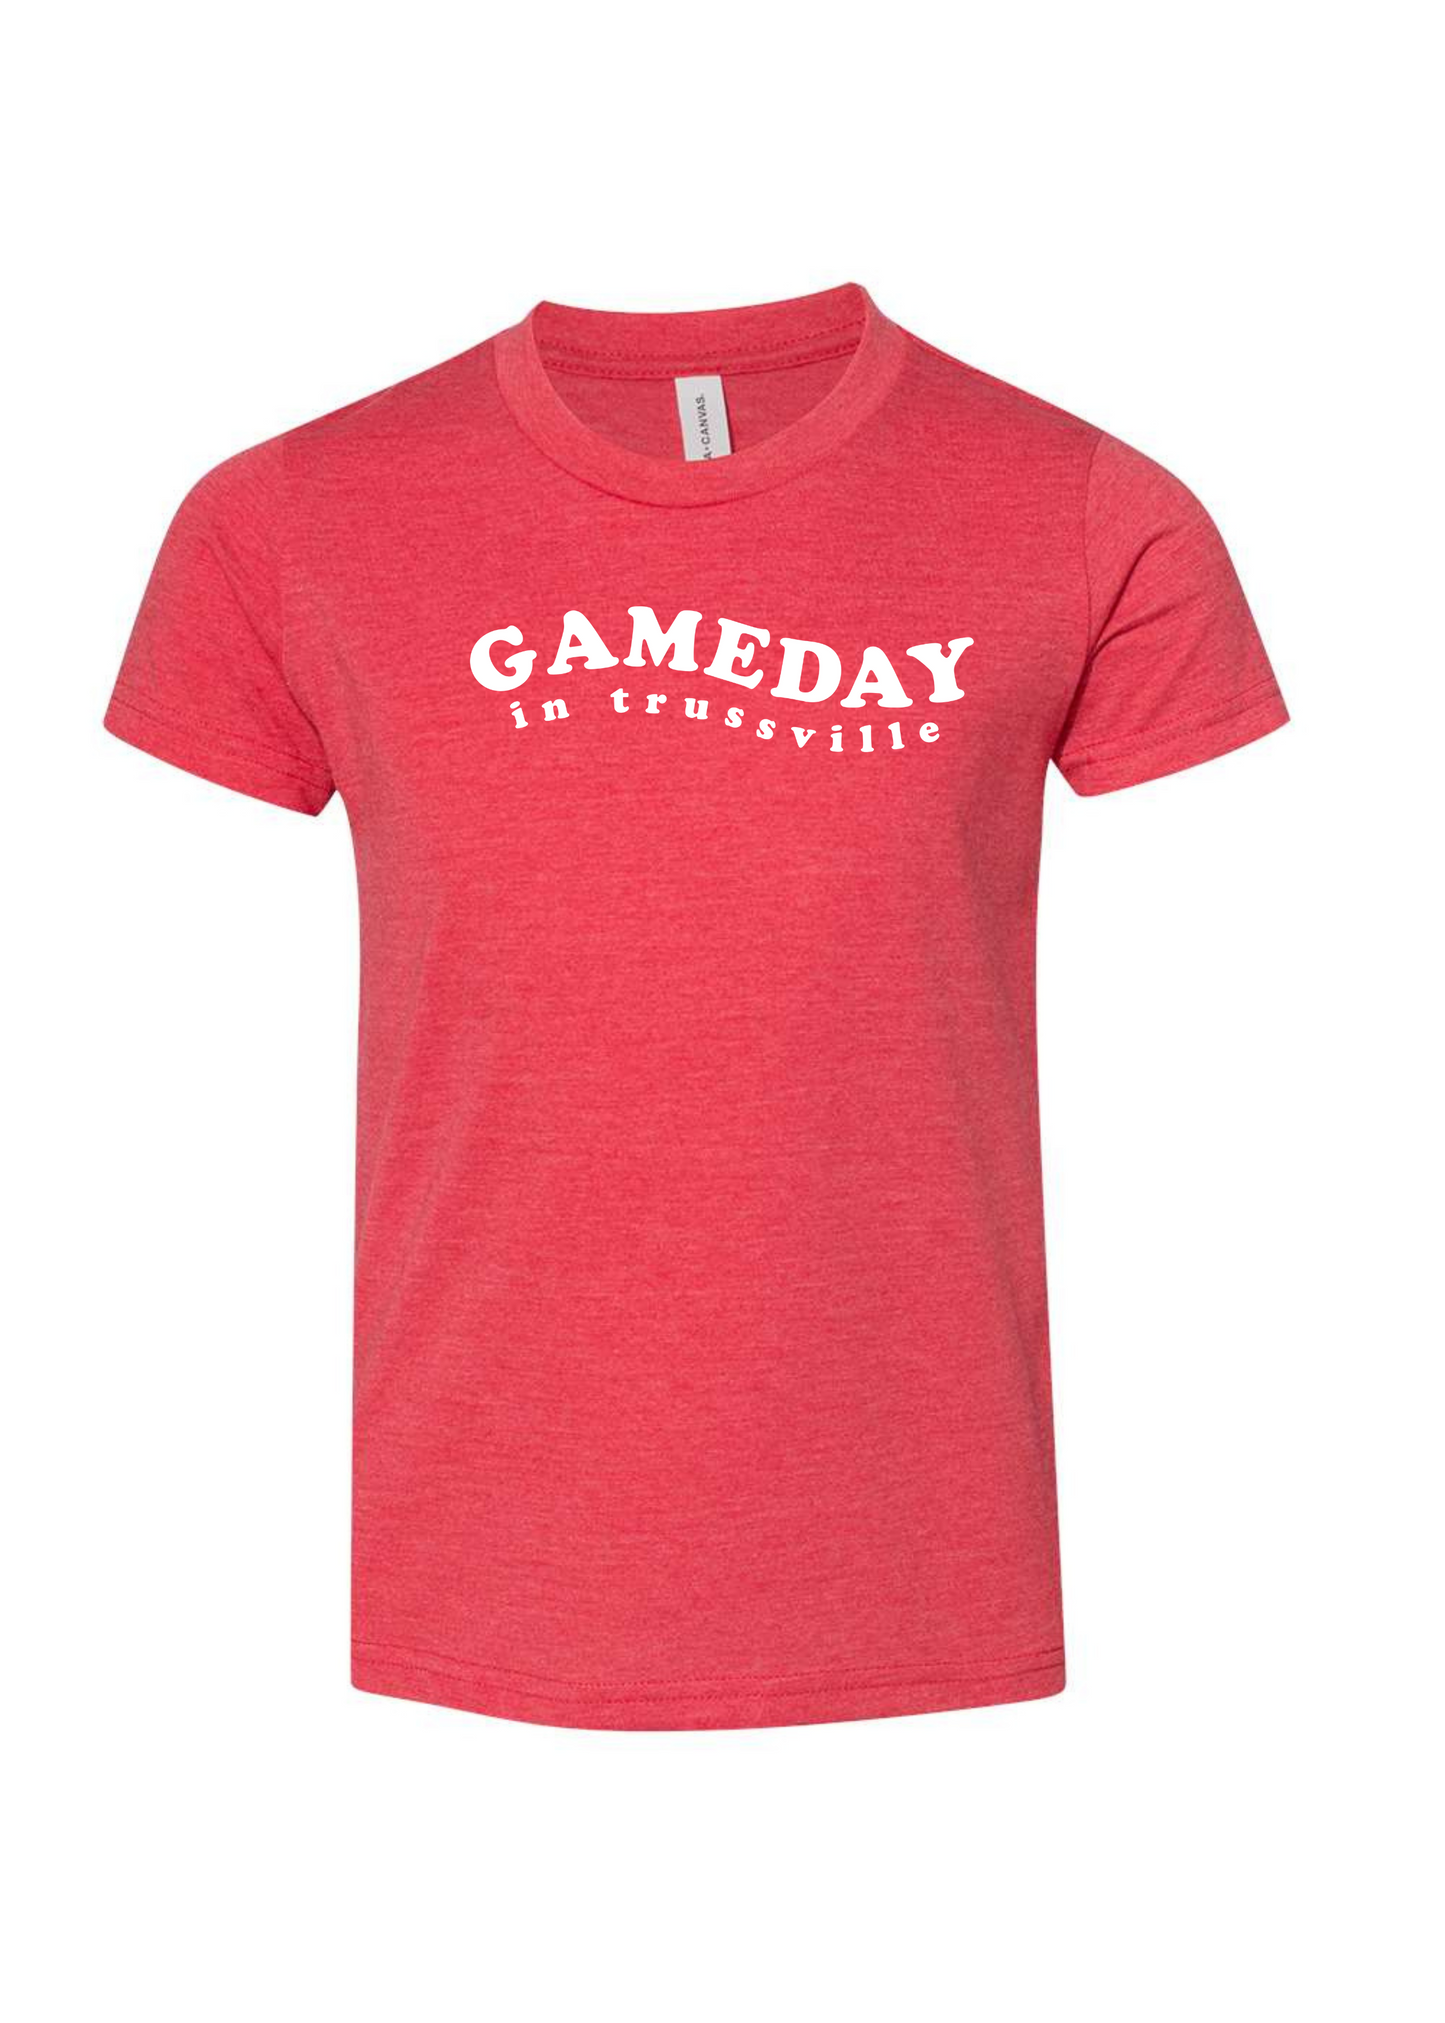 Gameday in Trussville | Kids Tee-Kids Tees-Sister Shirts-Sister Shirts, Cute & Custom Tees for Mama & Littles in Trussville, Alabama.